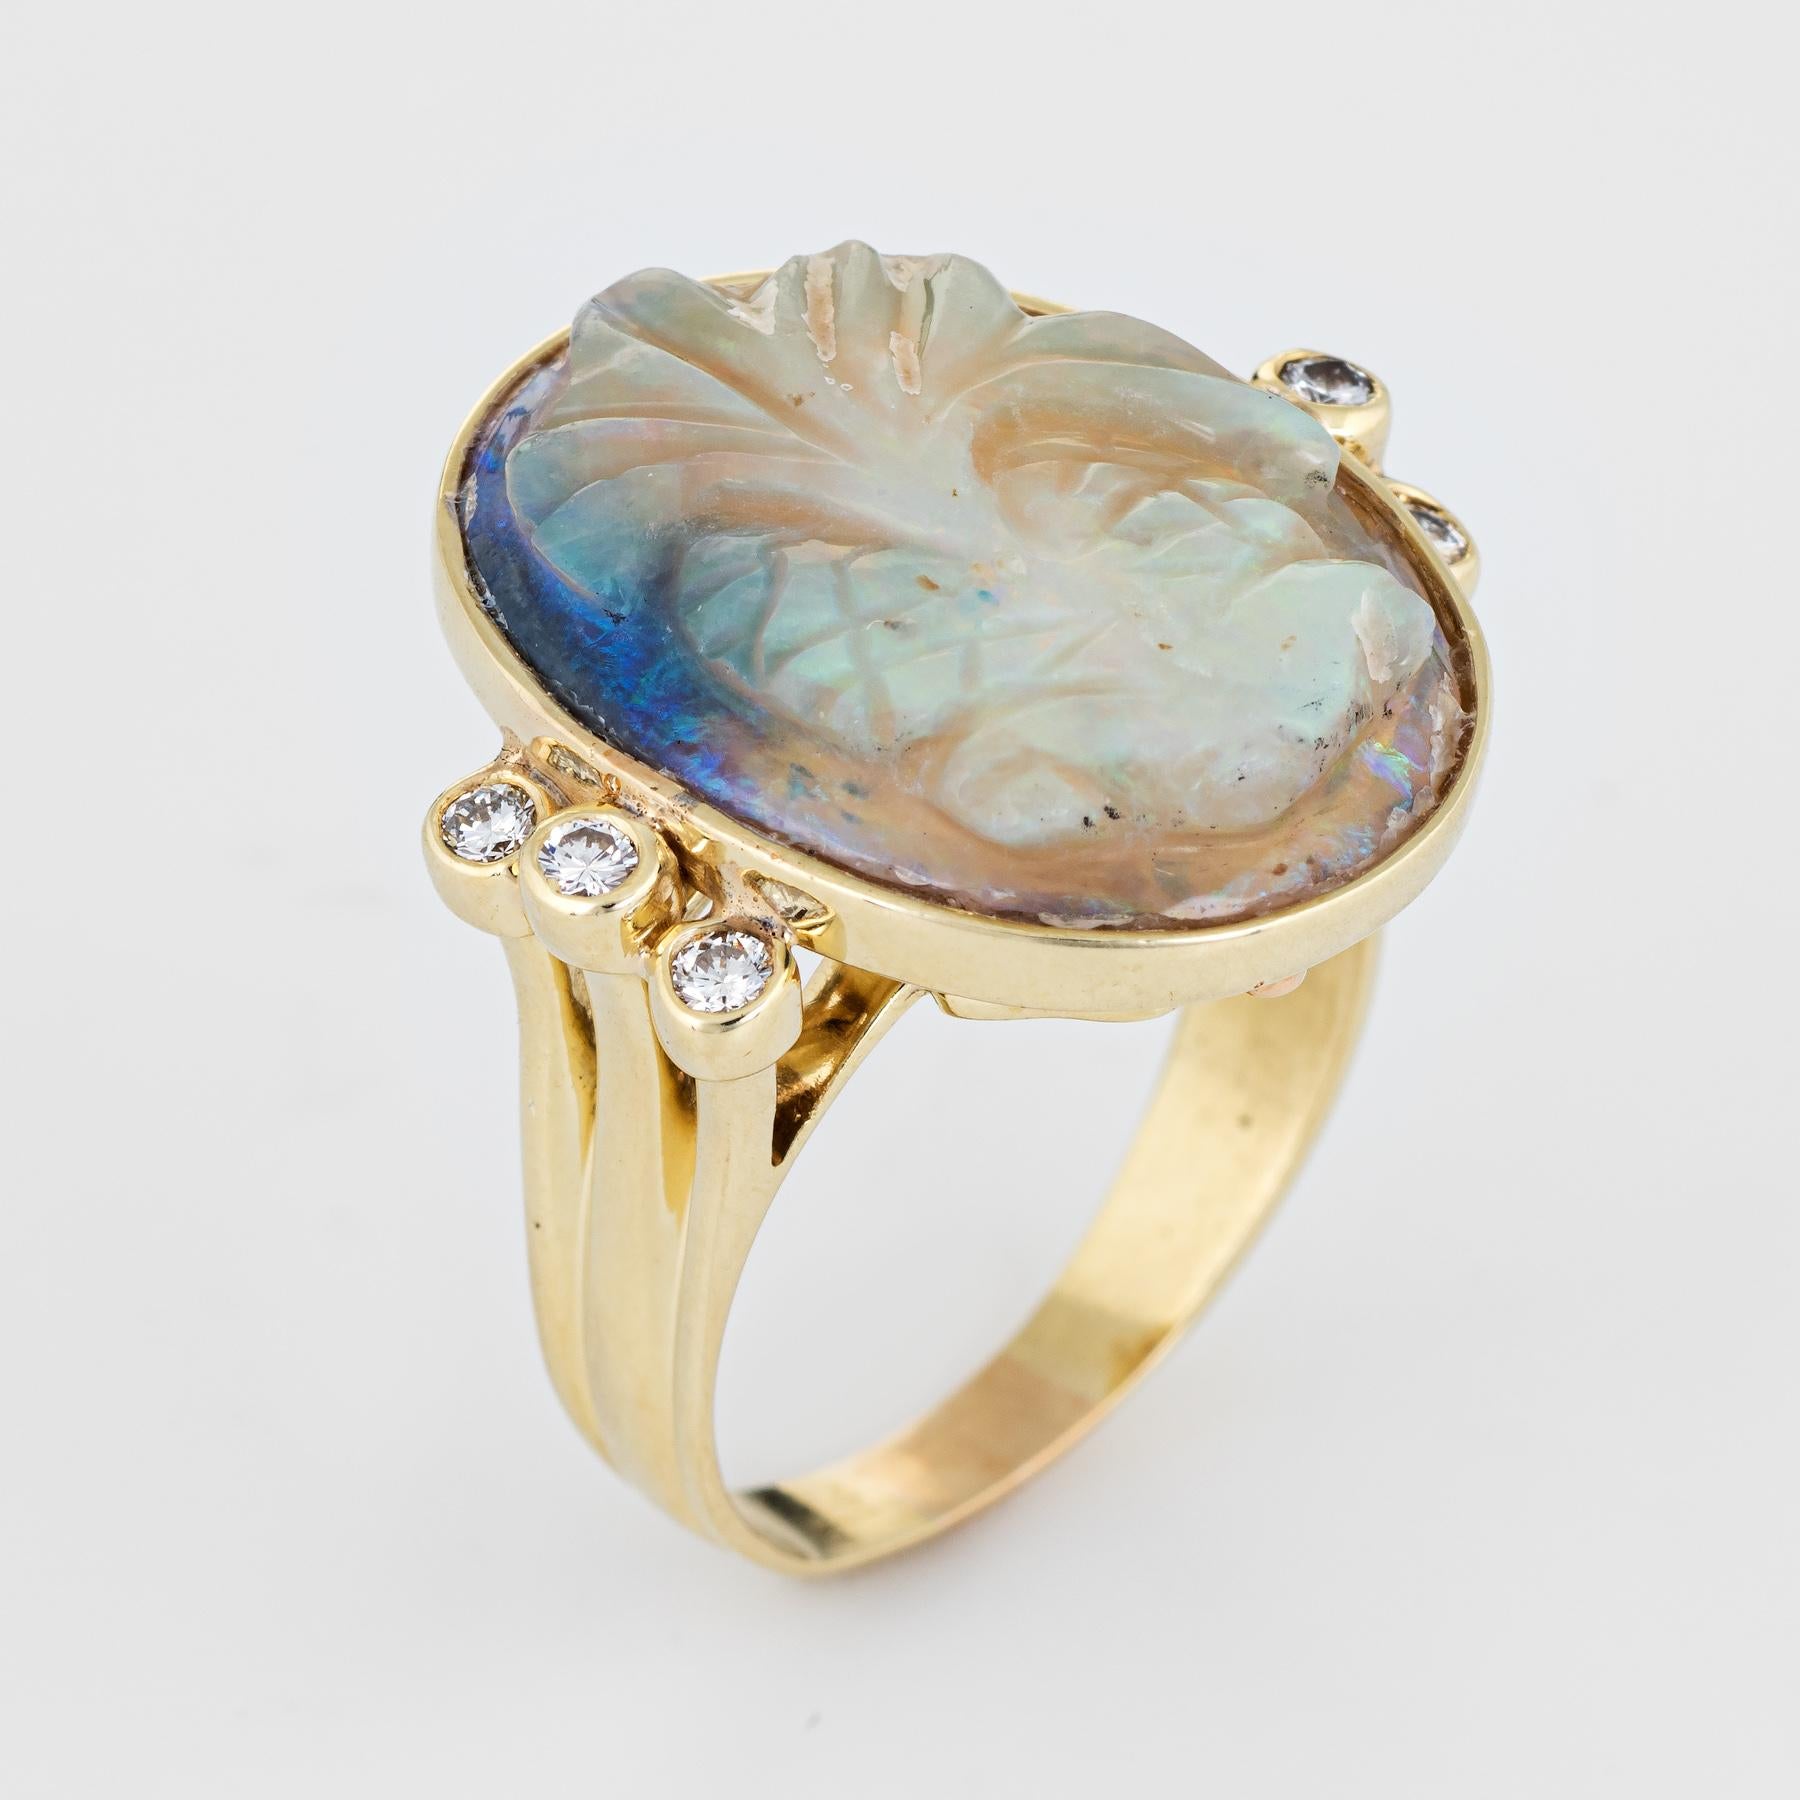 Finely detailed vintage carved opal & diamond ring (circa 1970s), crafted in 14 karat yellow gold. 

One oval piece of natural opal is carved in the form of a Palm Tree (measuring 20mm x 16mm). The opal is in excellent condition and free of cracks